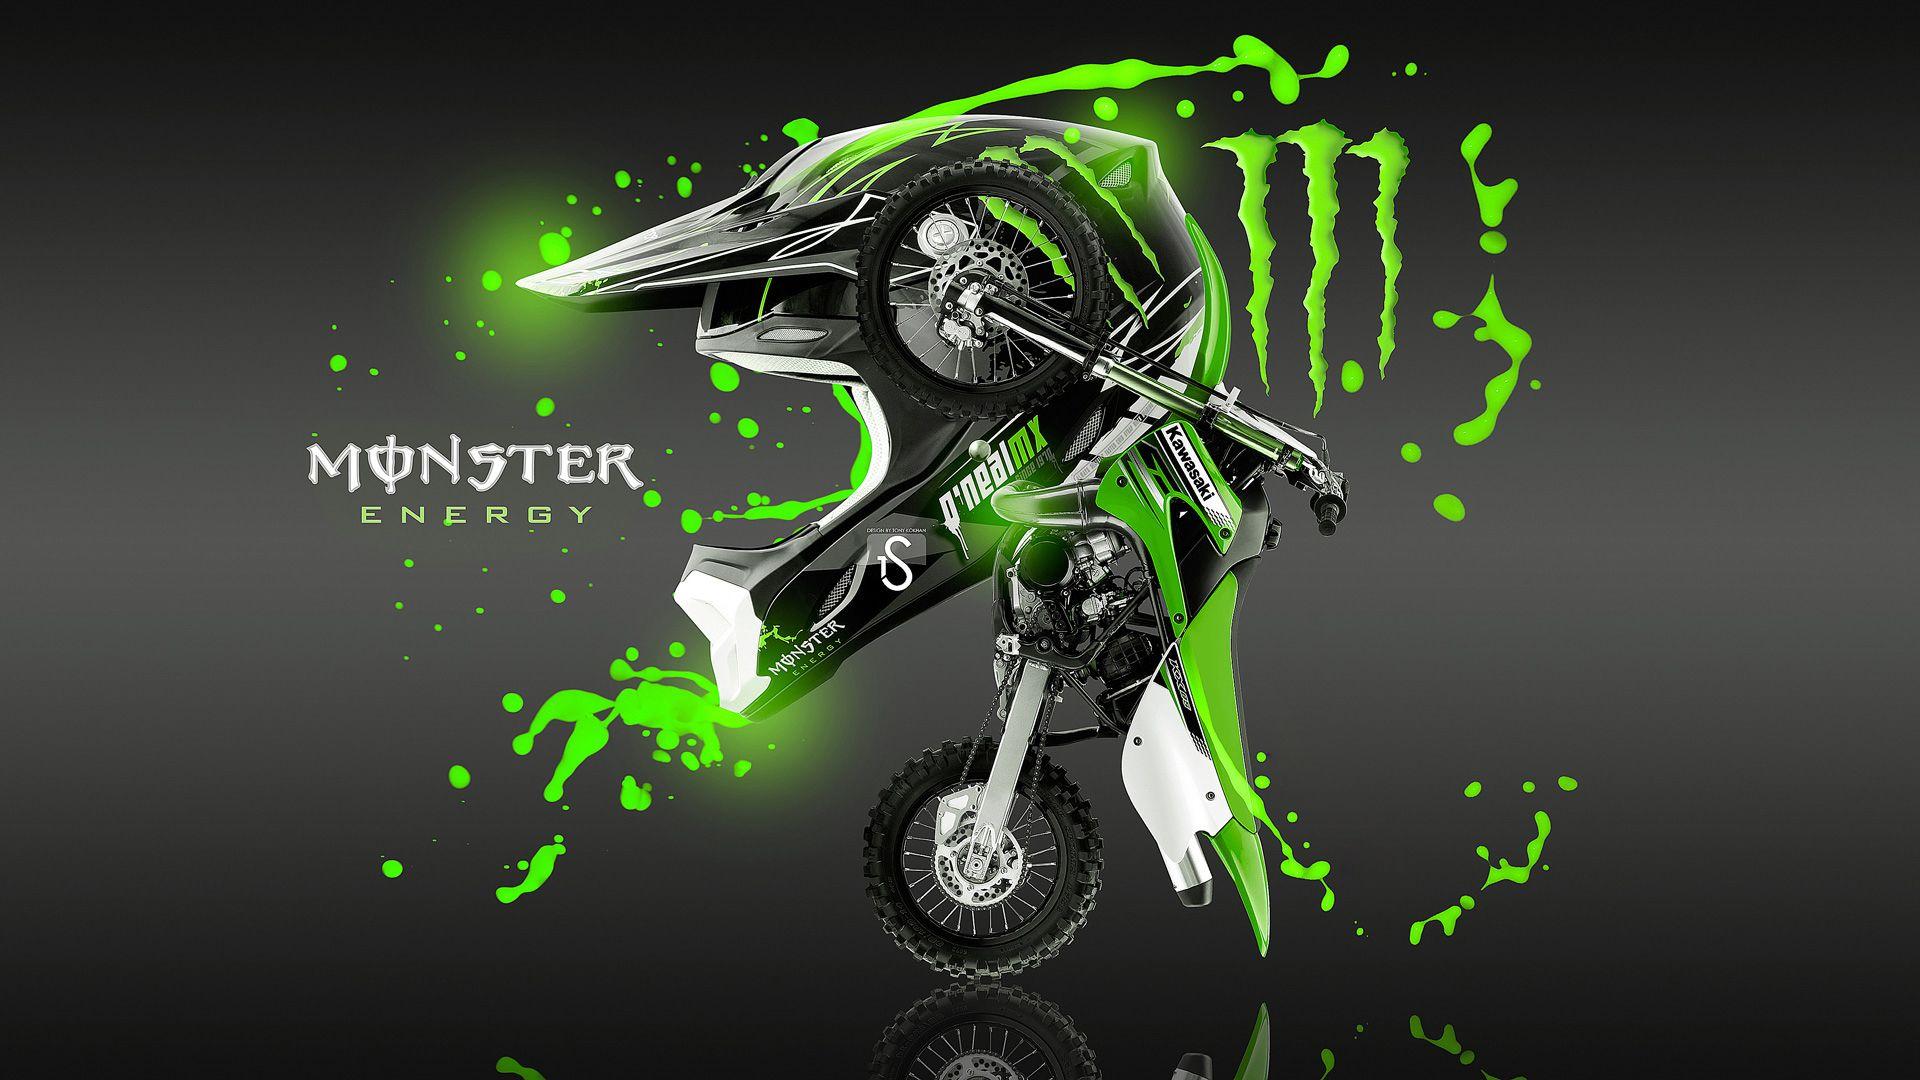 Monster Energy Wallpapers For Phones - Wallpaper Cave